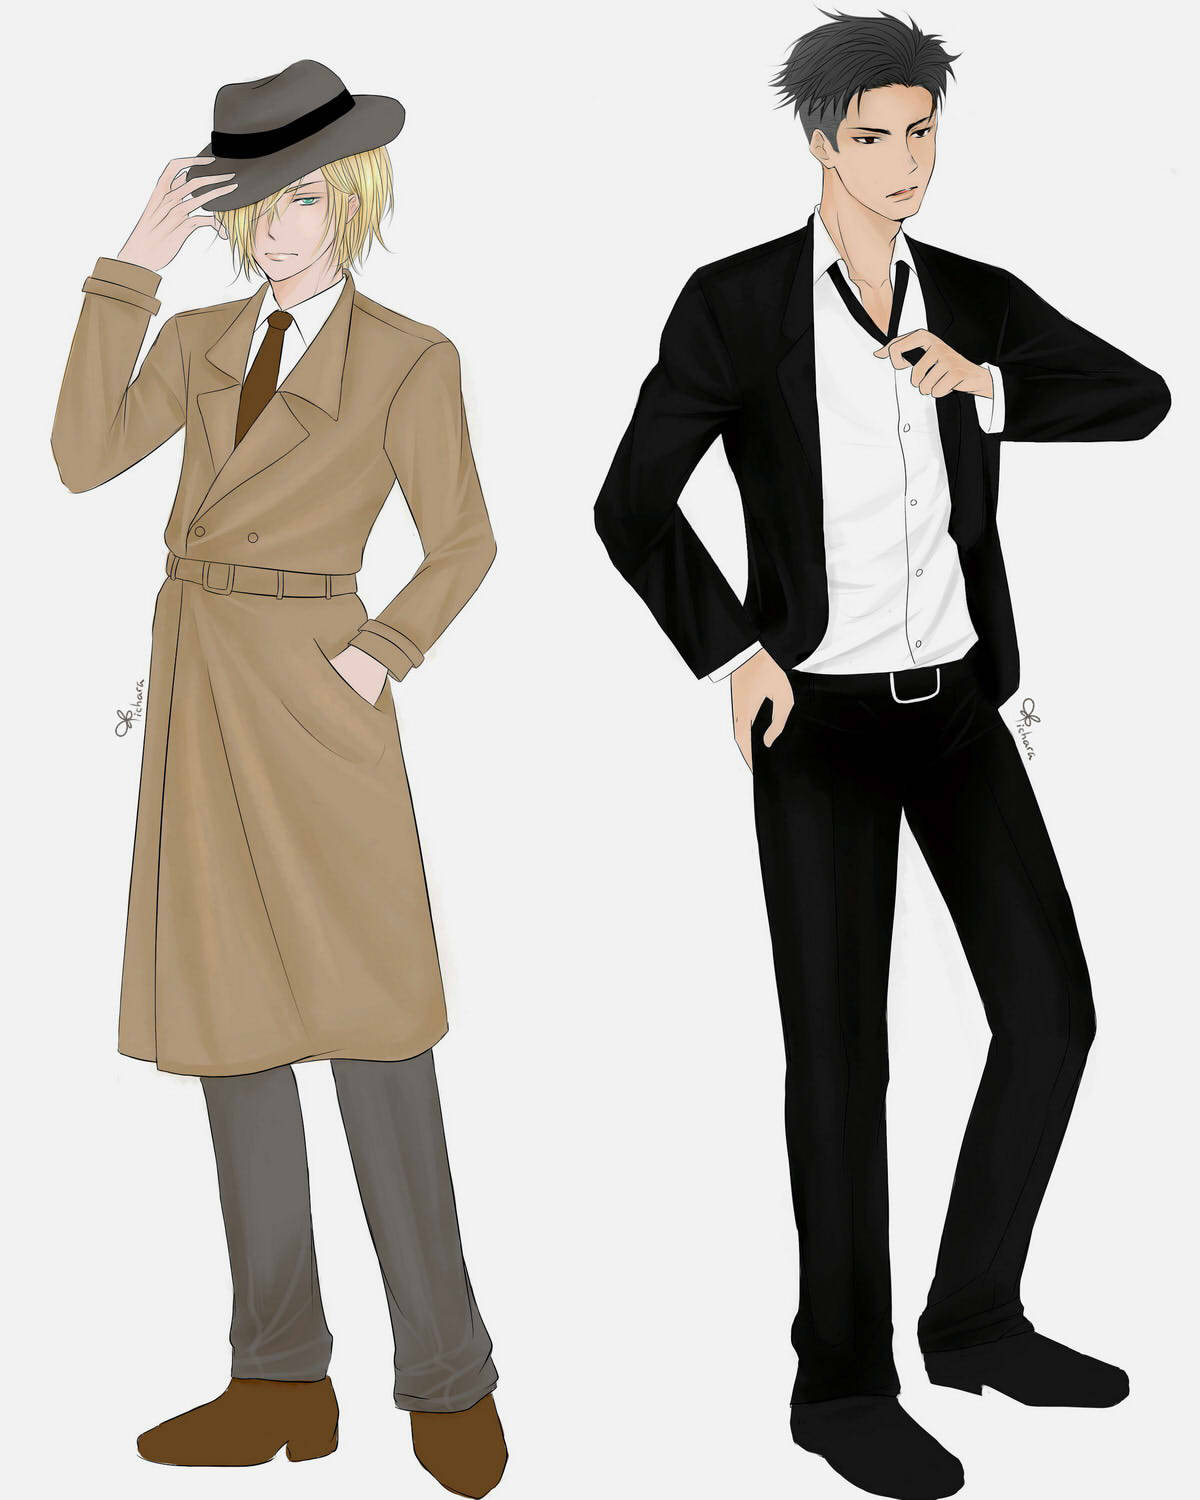 ichaichara: I absolutely fall in love with the detective AU from the recent official